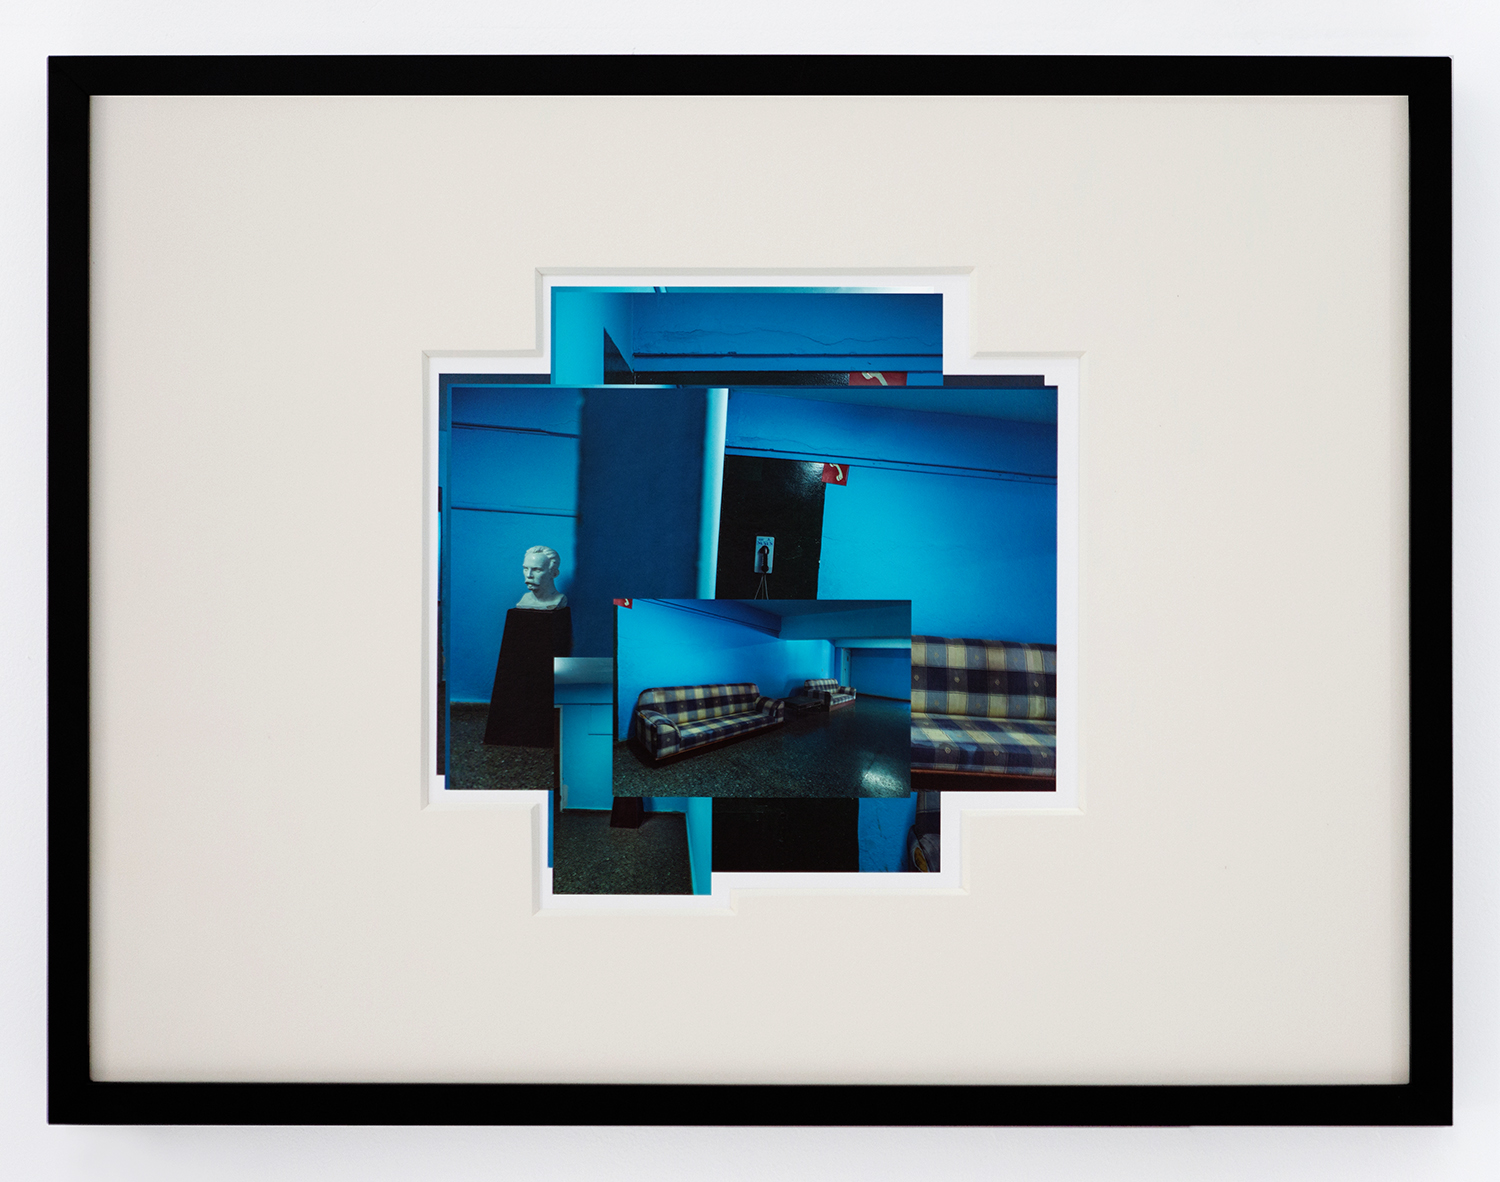   Blue , 2017 Archival cotton print with museum glass 24 x 18 inches Edition 1 of 7, 2 AP 